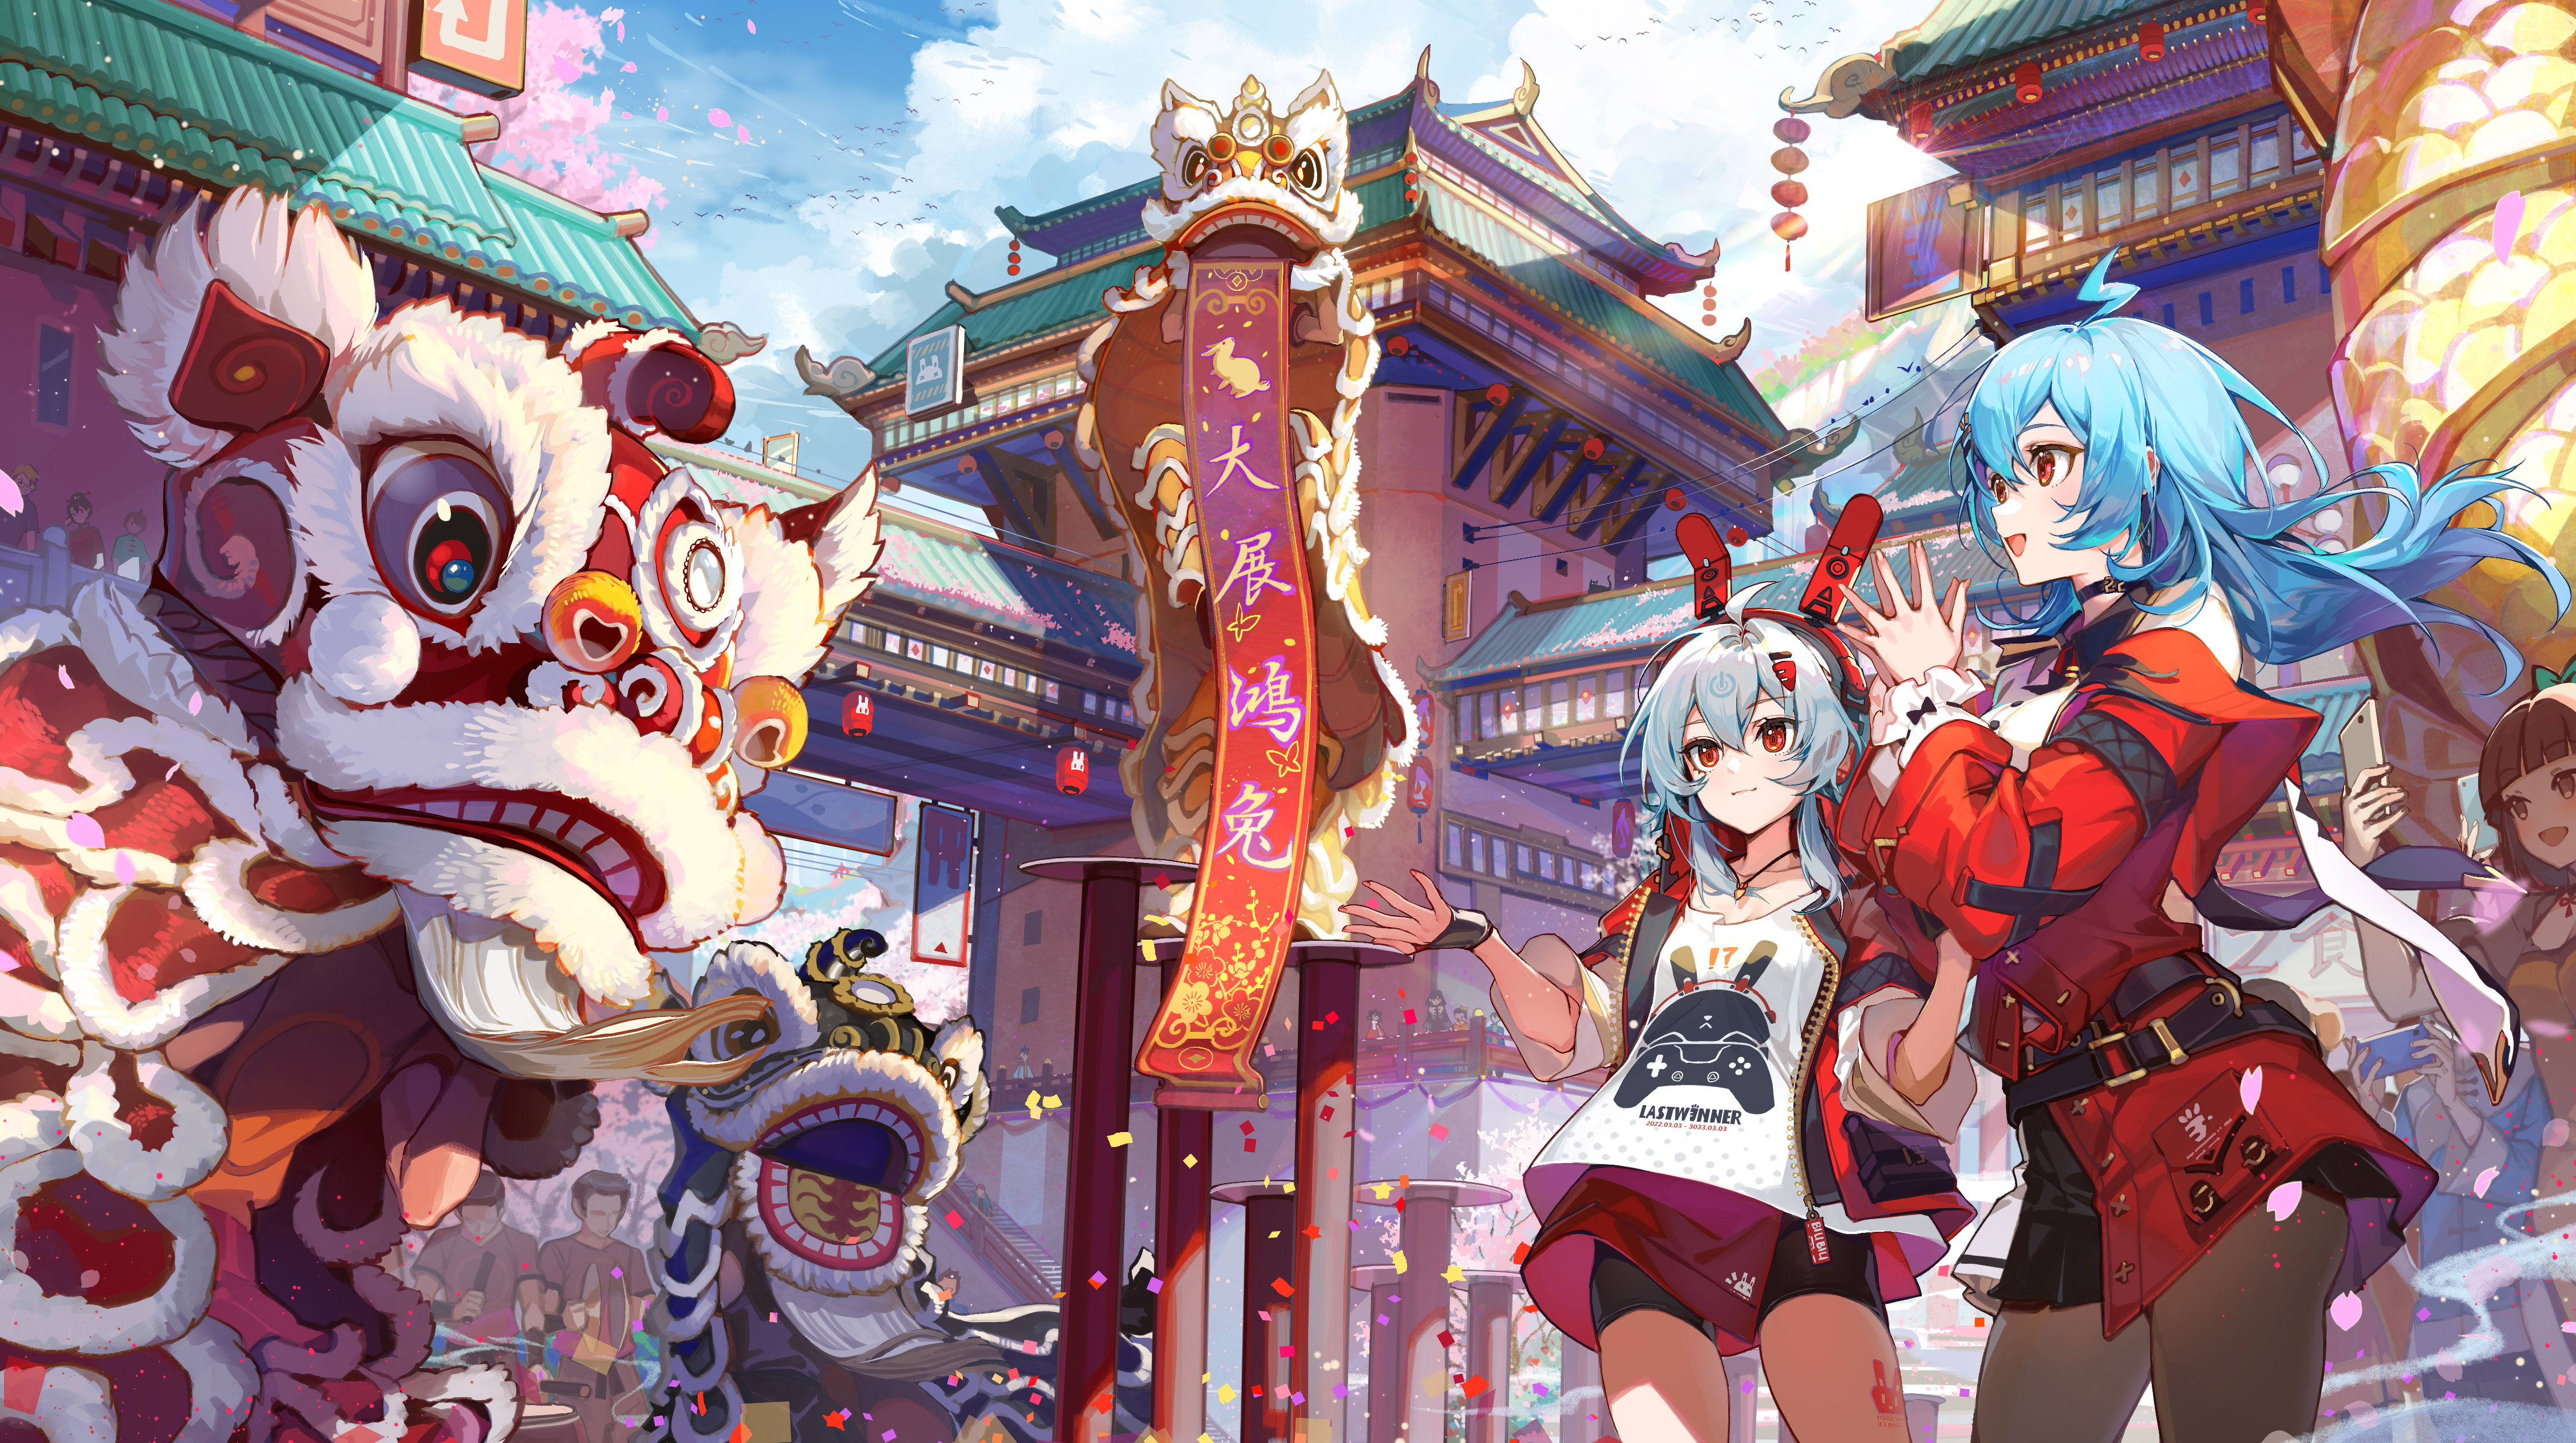 Anime 4500x2520 two women New Year antithetical couplet chinese new year anime girls petals